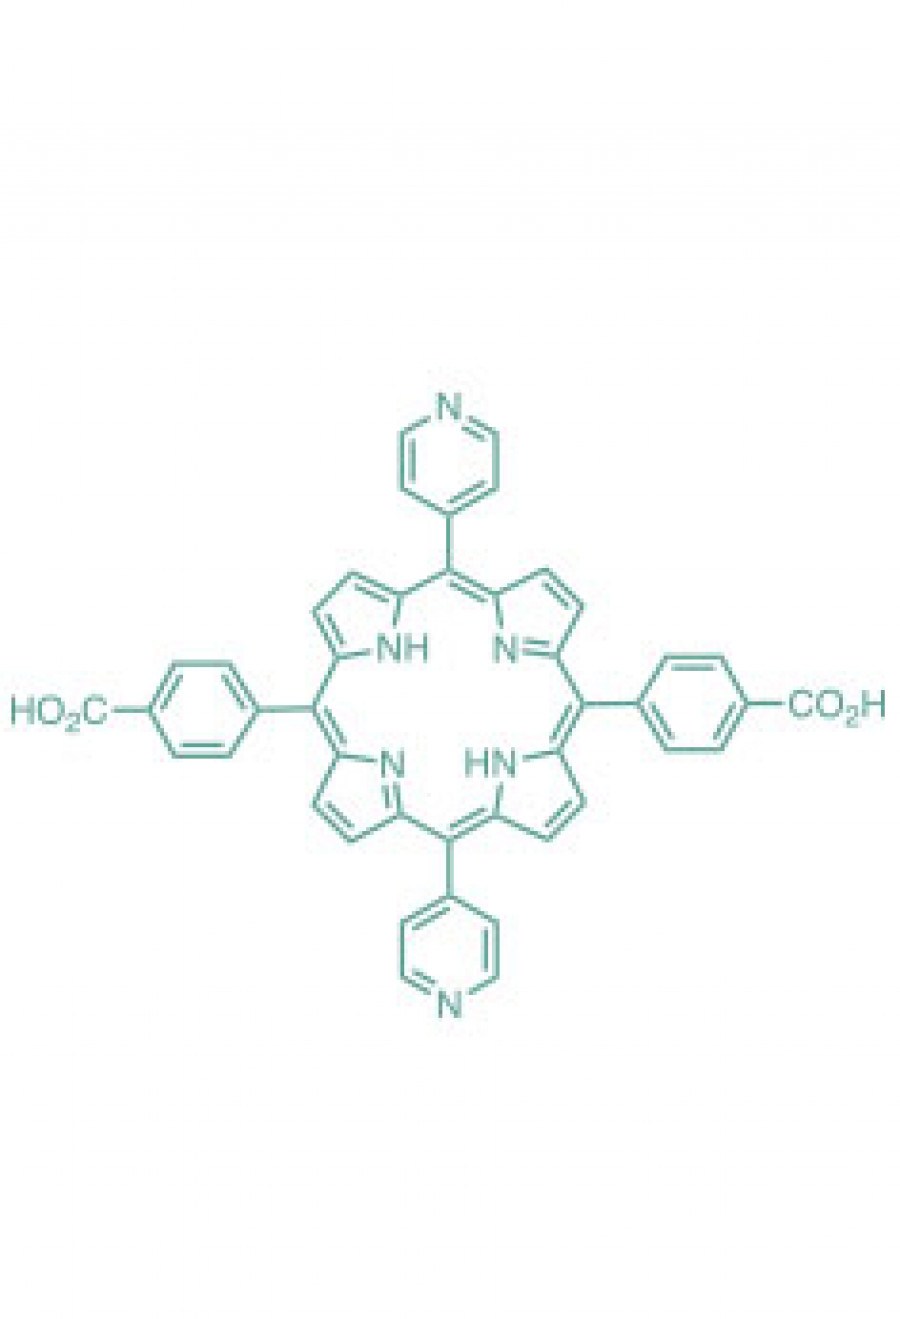 5,15-(di-4-carboxyphenyl)-10,20-(di-4-pyridyl)porphyrin  | Porphychem Expert porphyrin synthesis for research & industry